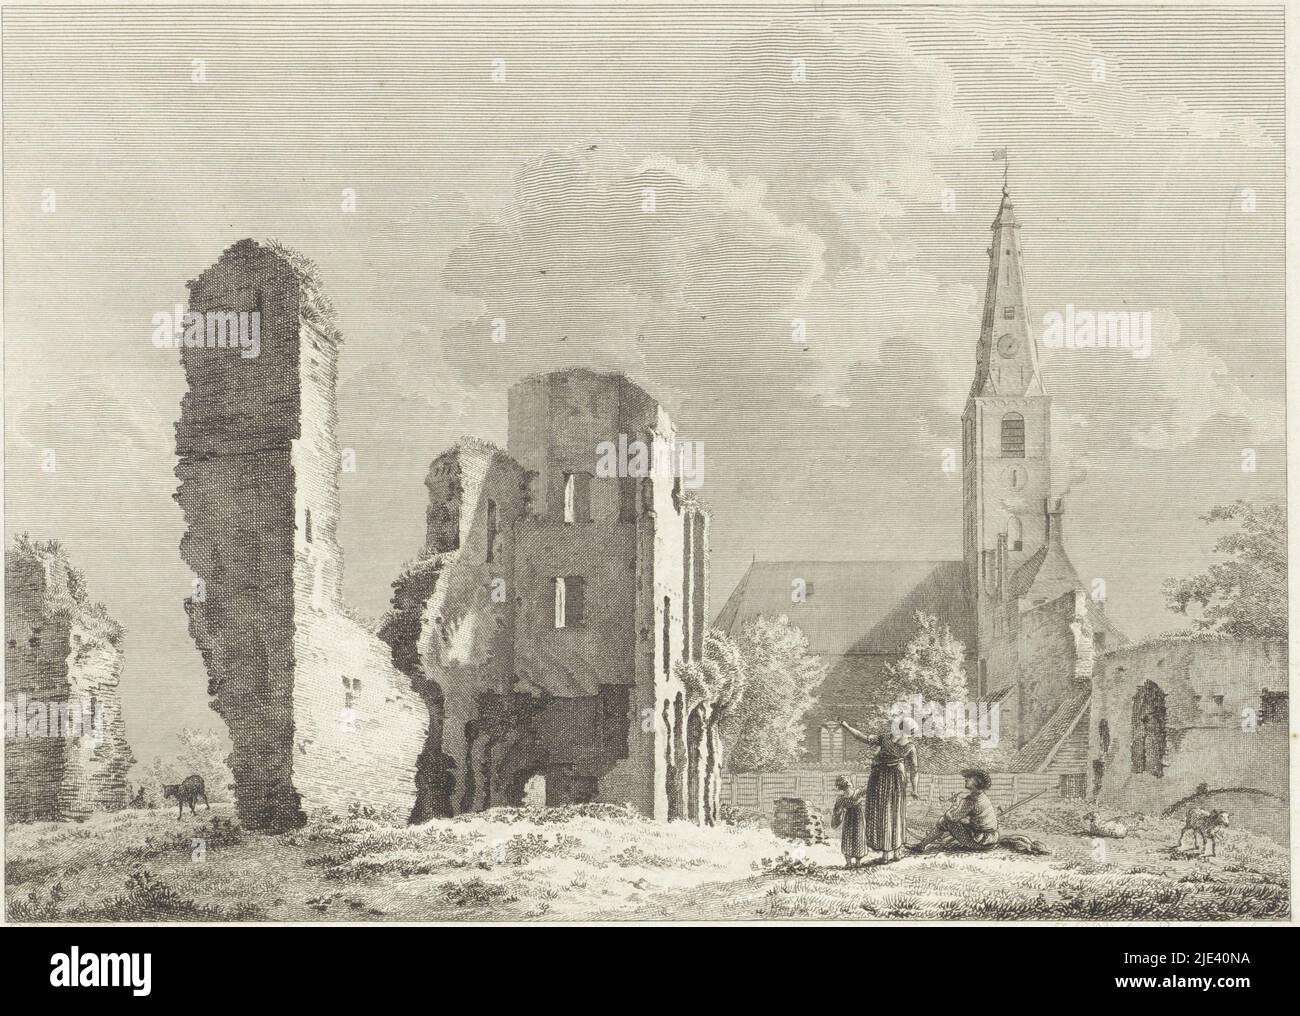 Ruins of the abbey at Rijnsburg, Joannes Pieter Visser Bender, after Pieter Bartholomeusz. Barbiers, 1812, View of the ruins of the abbey at Rijnsburg. In the foreground is a woman with a child in conversation with a seated farmer, pipe in hand and beside him a scythe., print maker: Joannes Pieter Visser Bender, (mentioned on object), intermediary draughtsman: Pieter Bartholomeusz. Barbiers, (mentioned on object), Haarlem, 1812, paper, etching, engraving, h 210 mm × w 270 mm Stock Photo